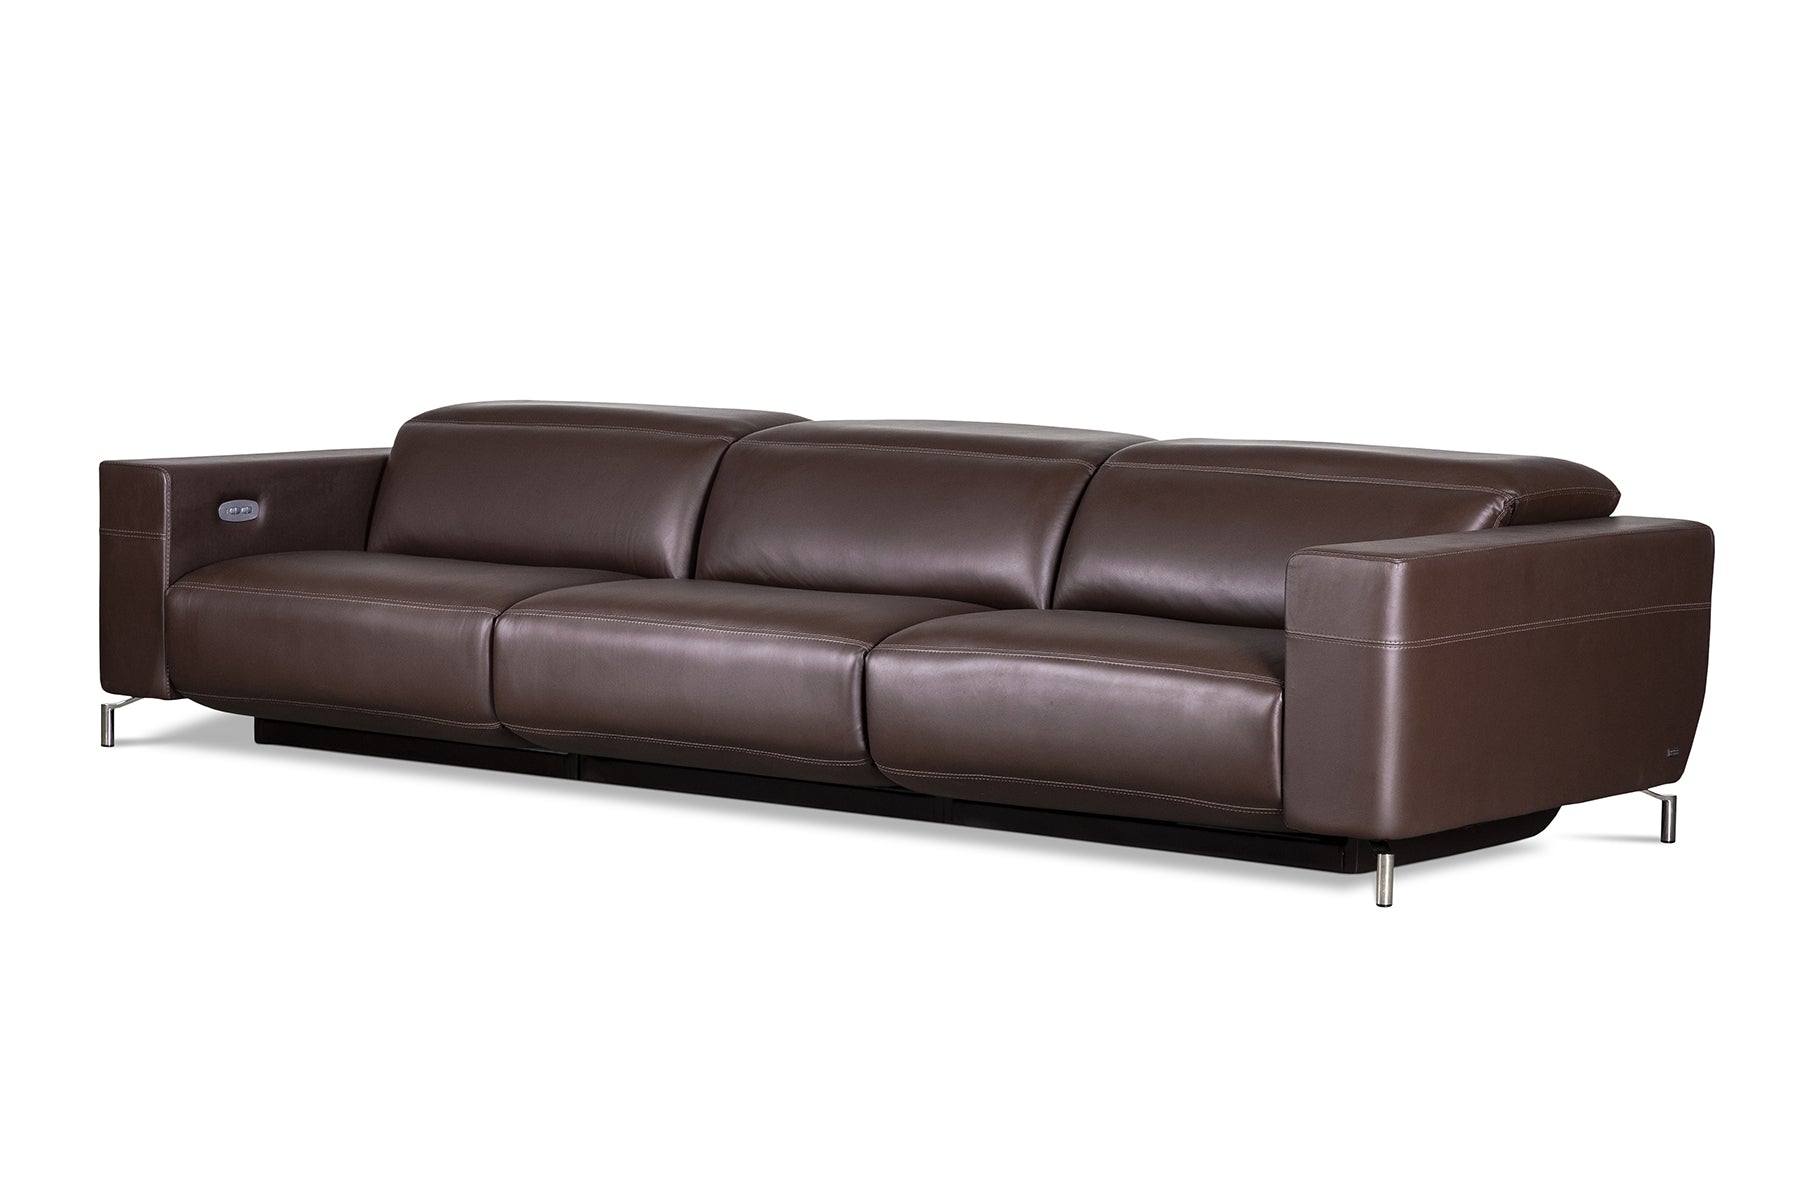 Monza Sectional